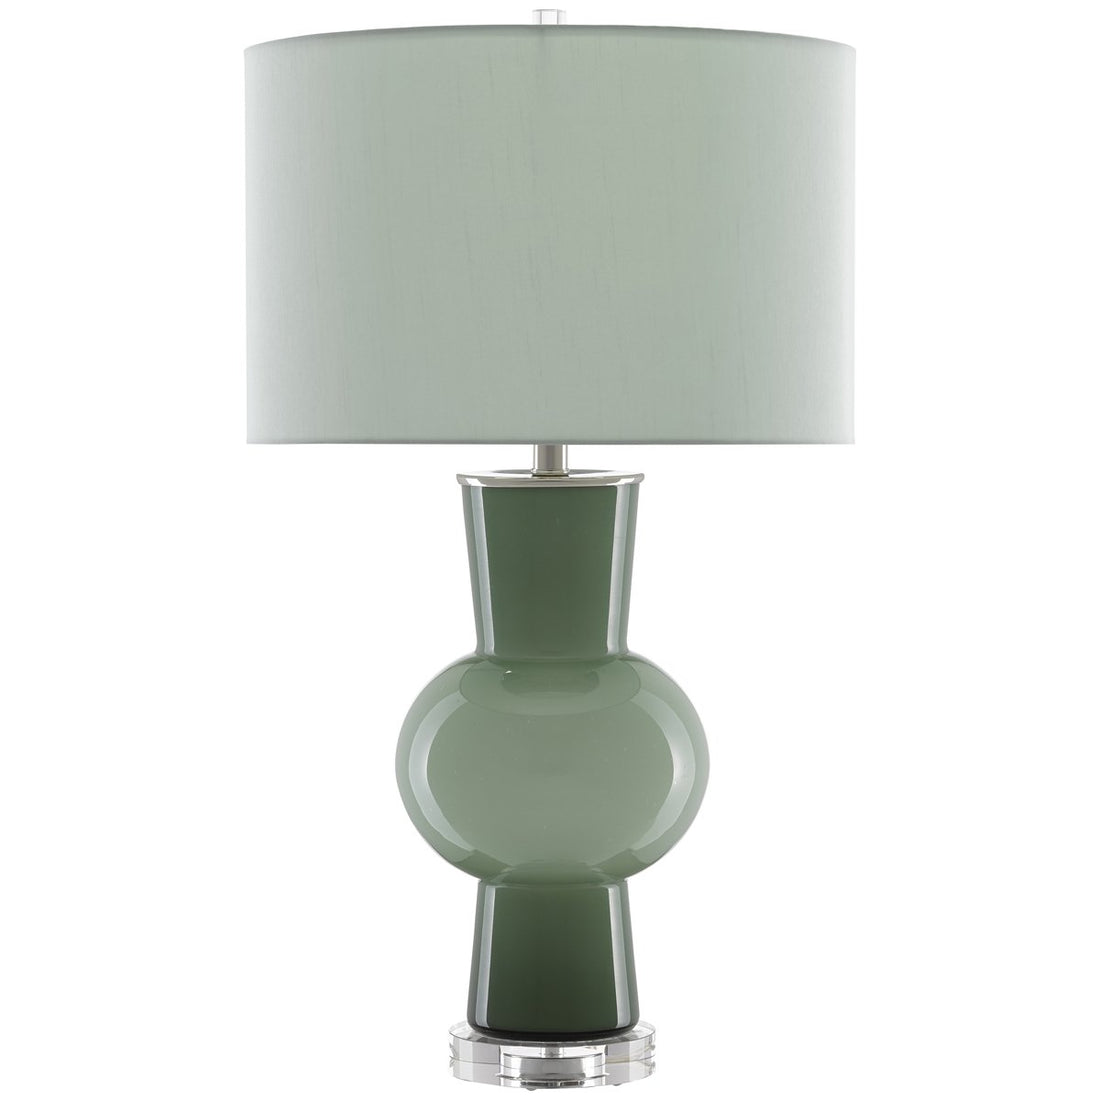 Currey and Company Duende Table Lamp